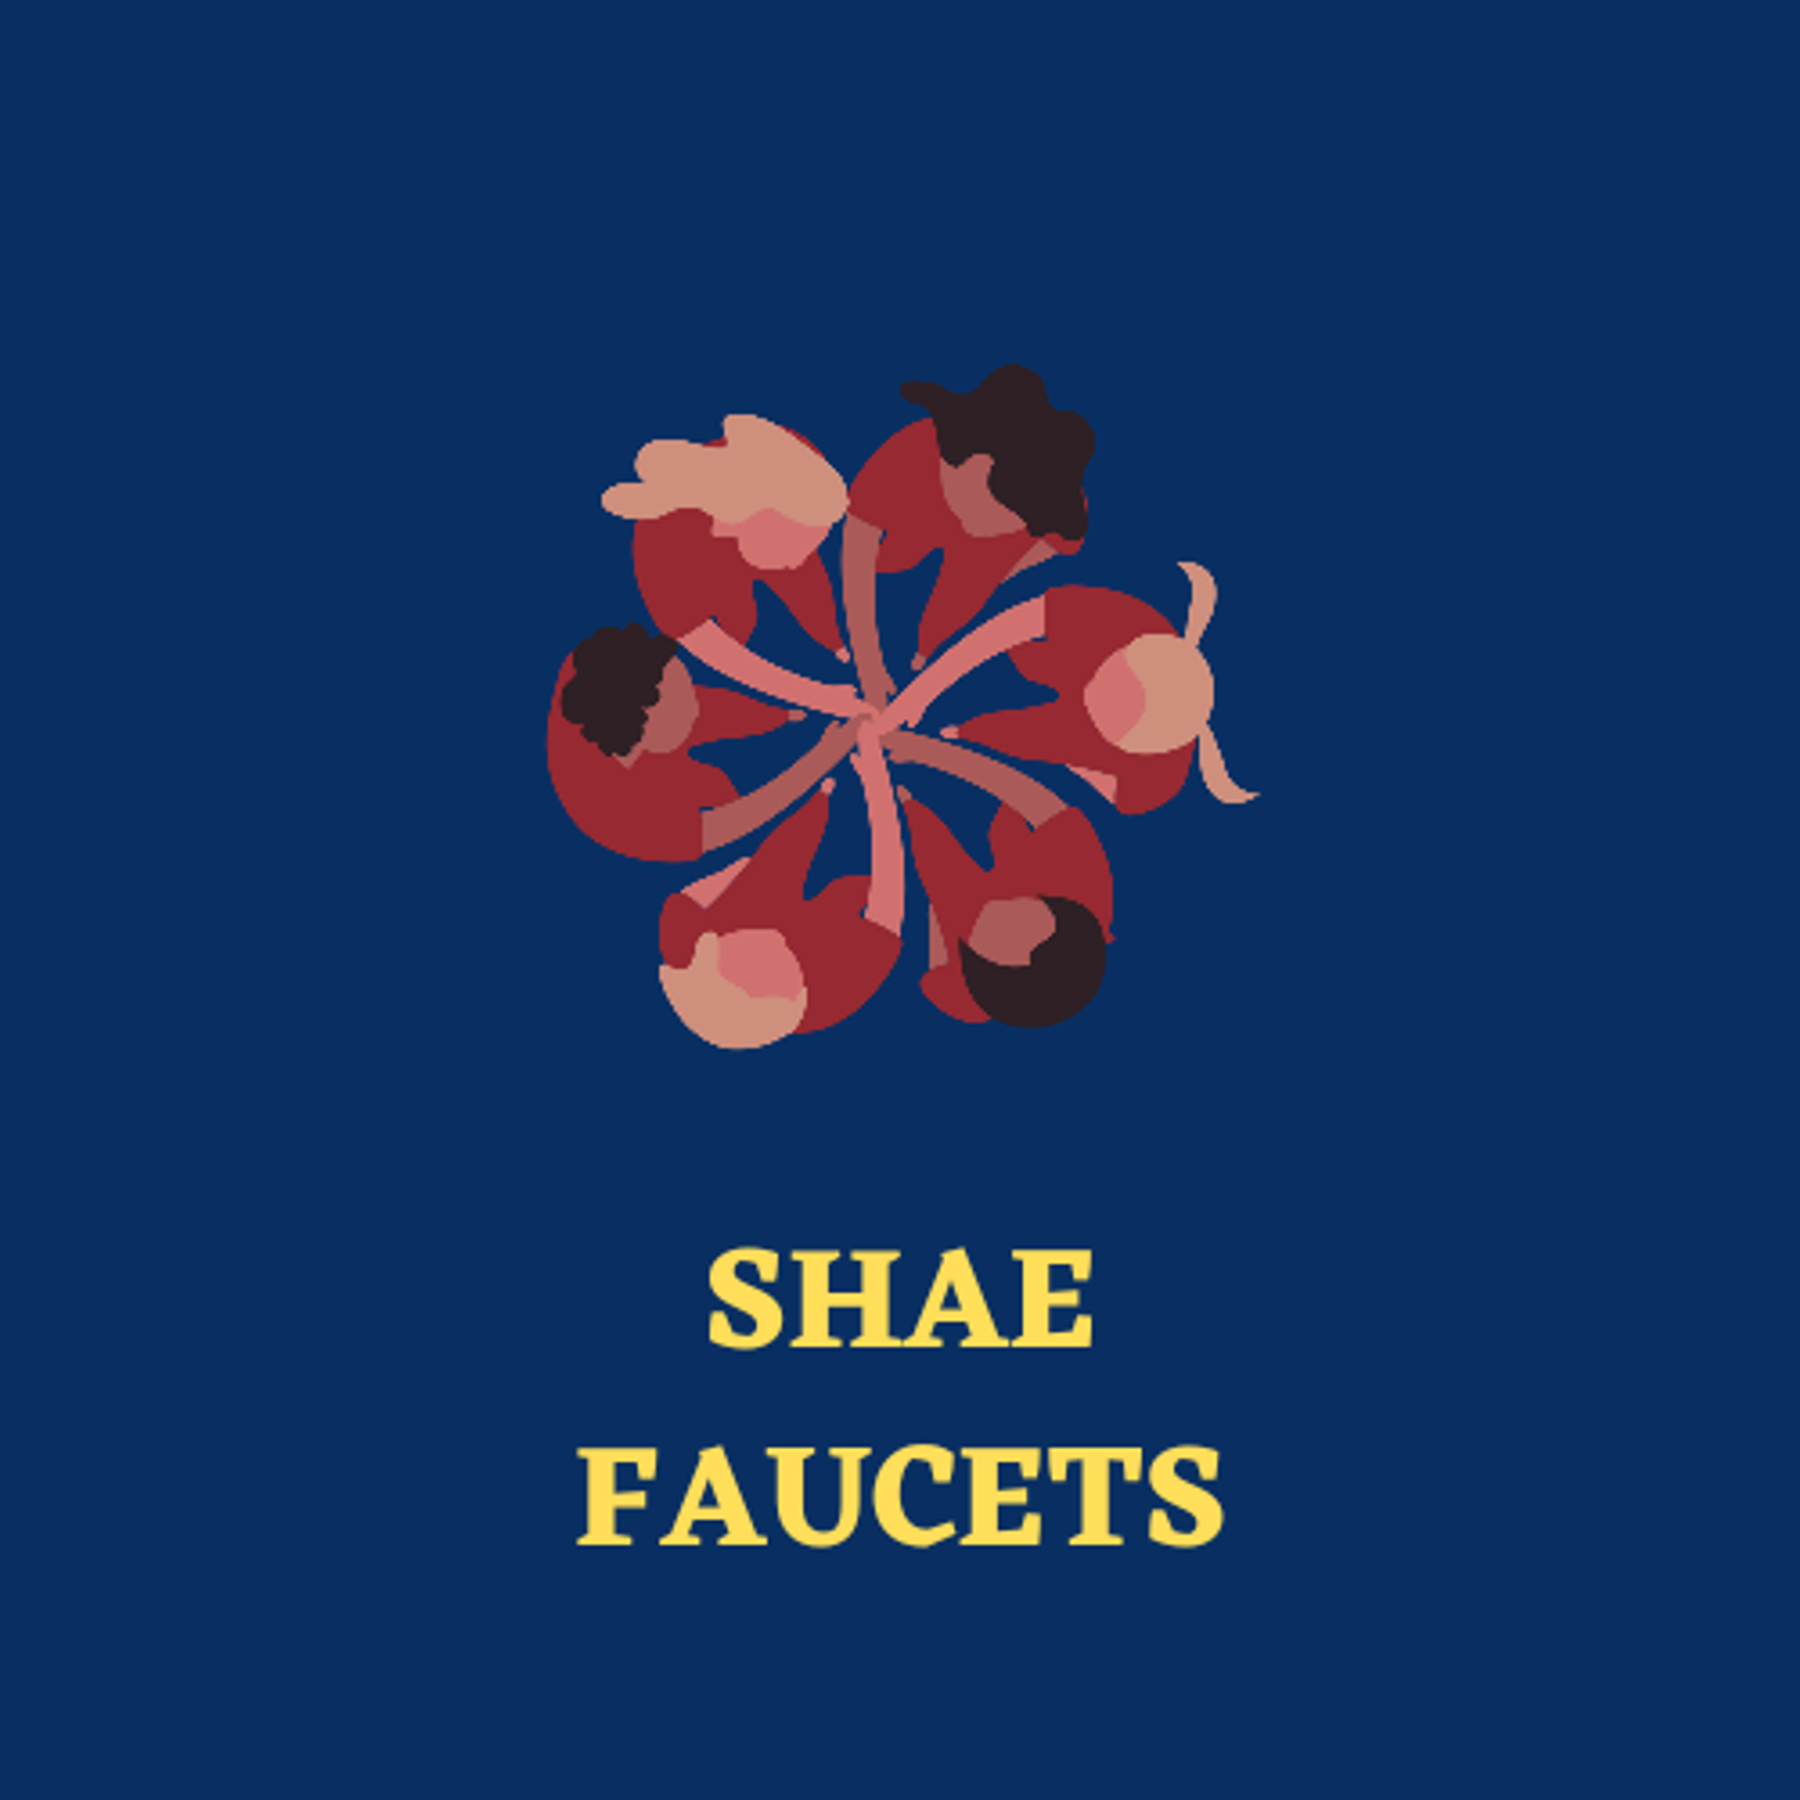 Shae Faucets | Official Website - Bittorrent-Express